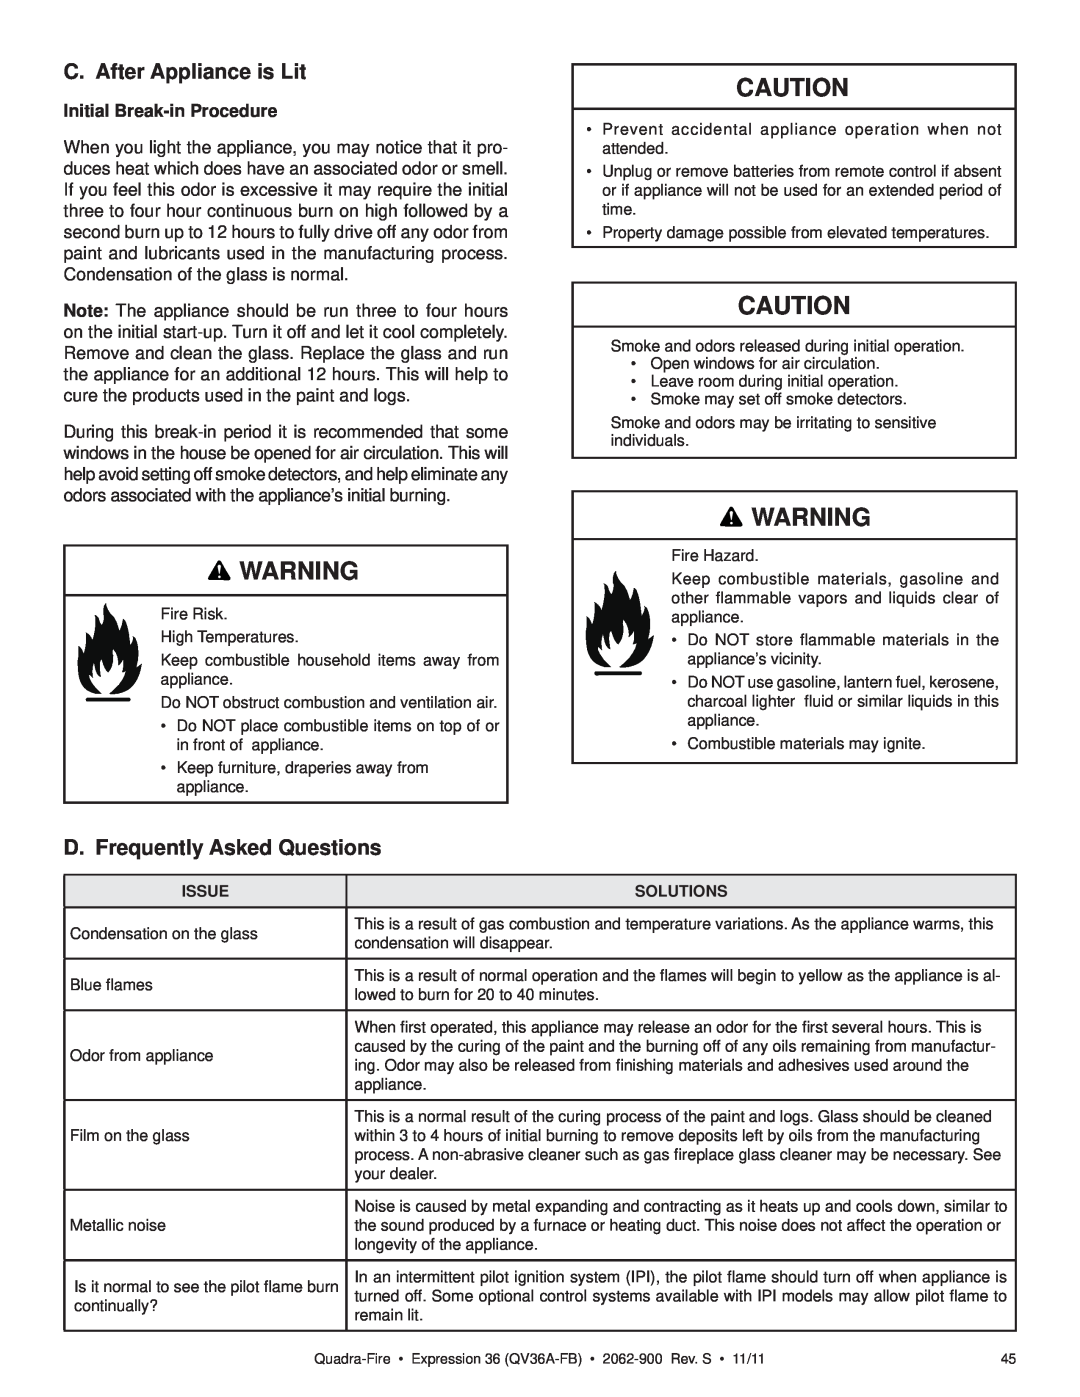 Quadra-Fire QV36A-FB owner manual C. After Appliance is Lit, D. Frequently Asked Questions, Initial Break-inProcedure 